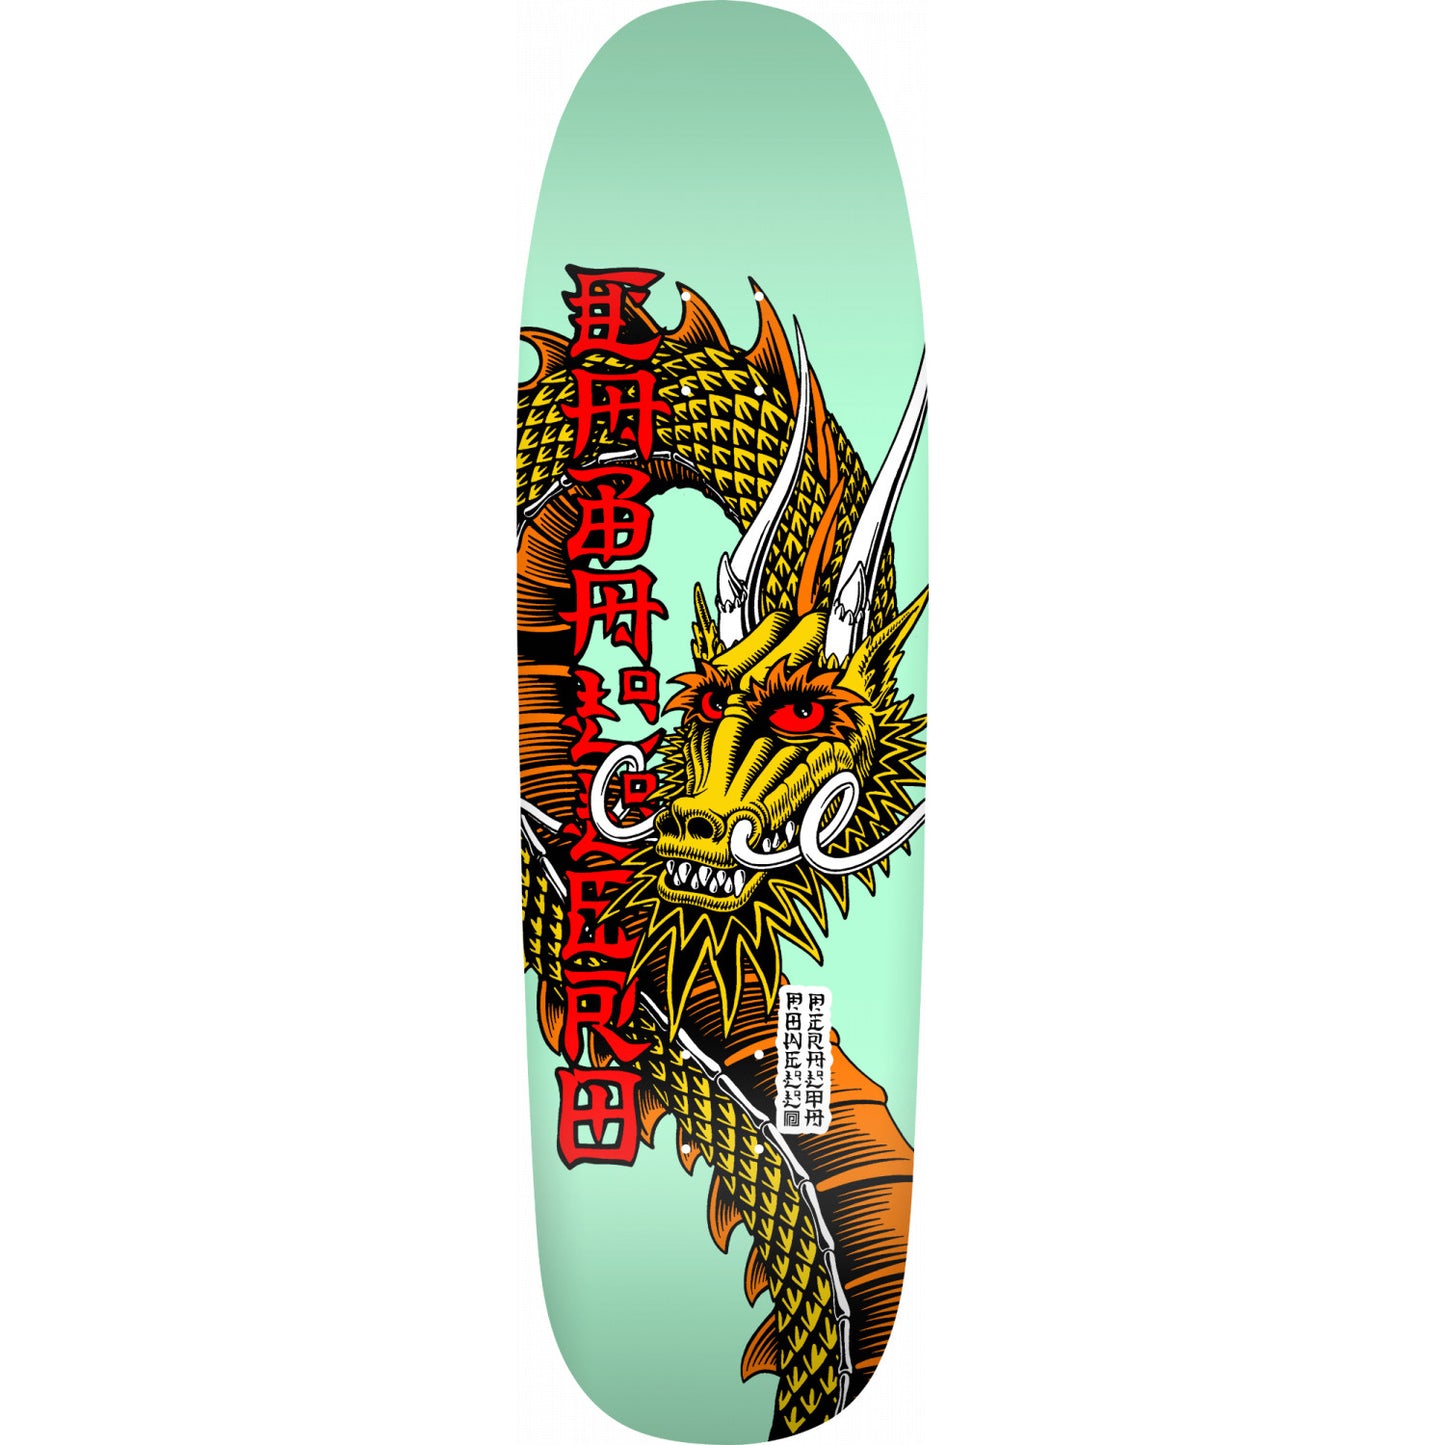 Powell Peralta 192 K15 Caballero Ban This Mint Dipped 9.265" Re-Issue Shaped Skateboard Deck